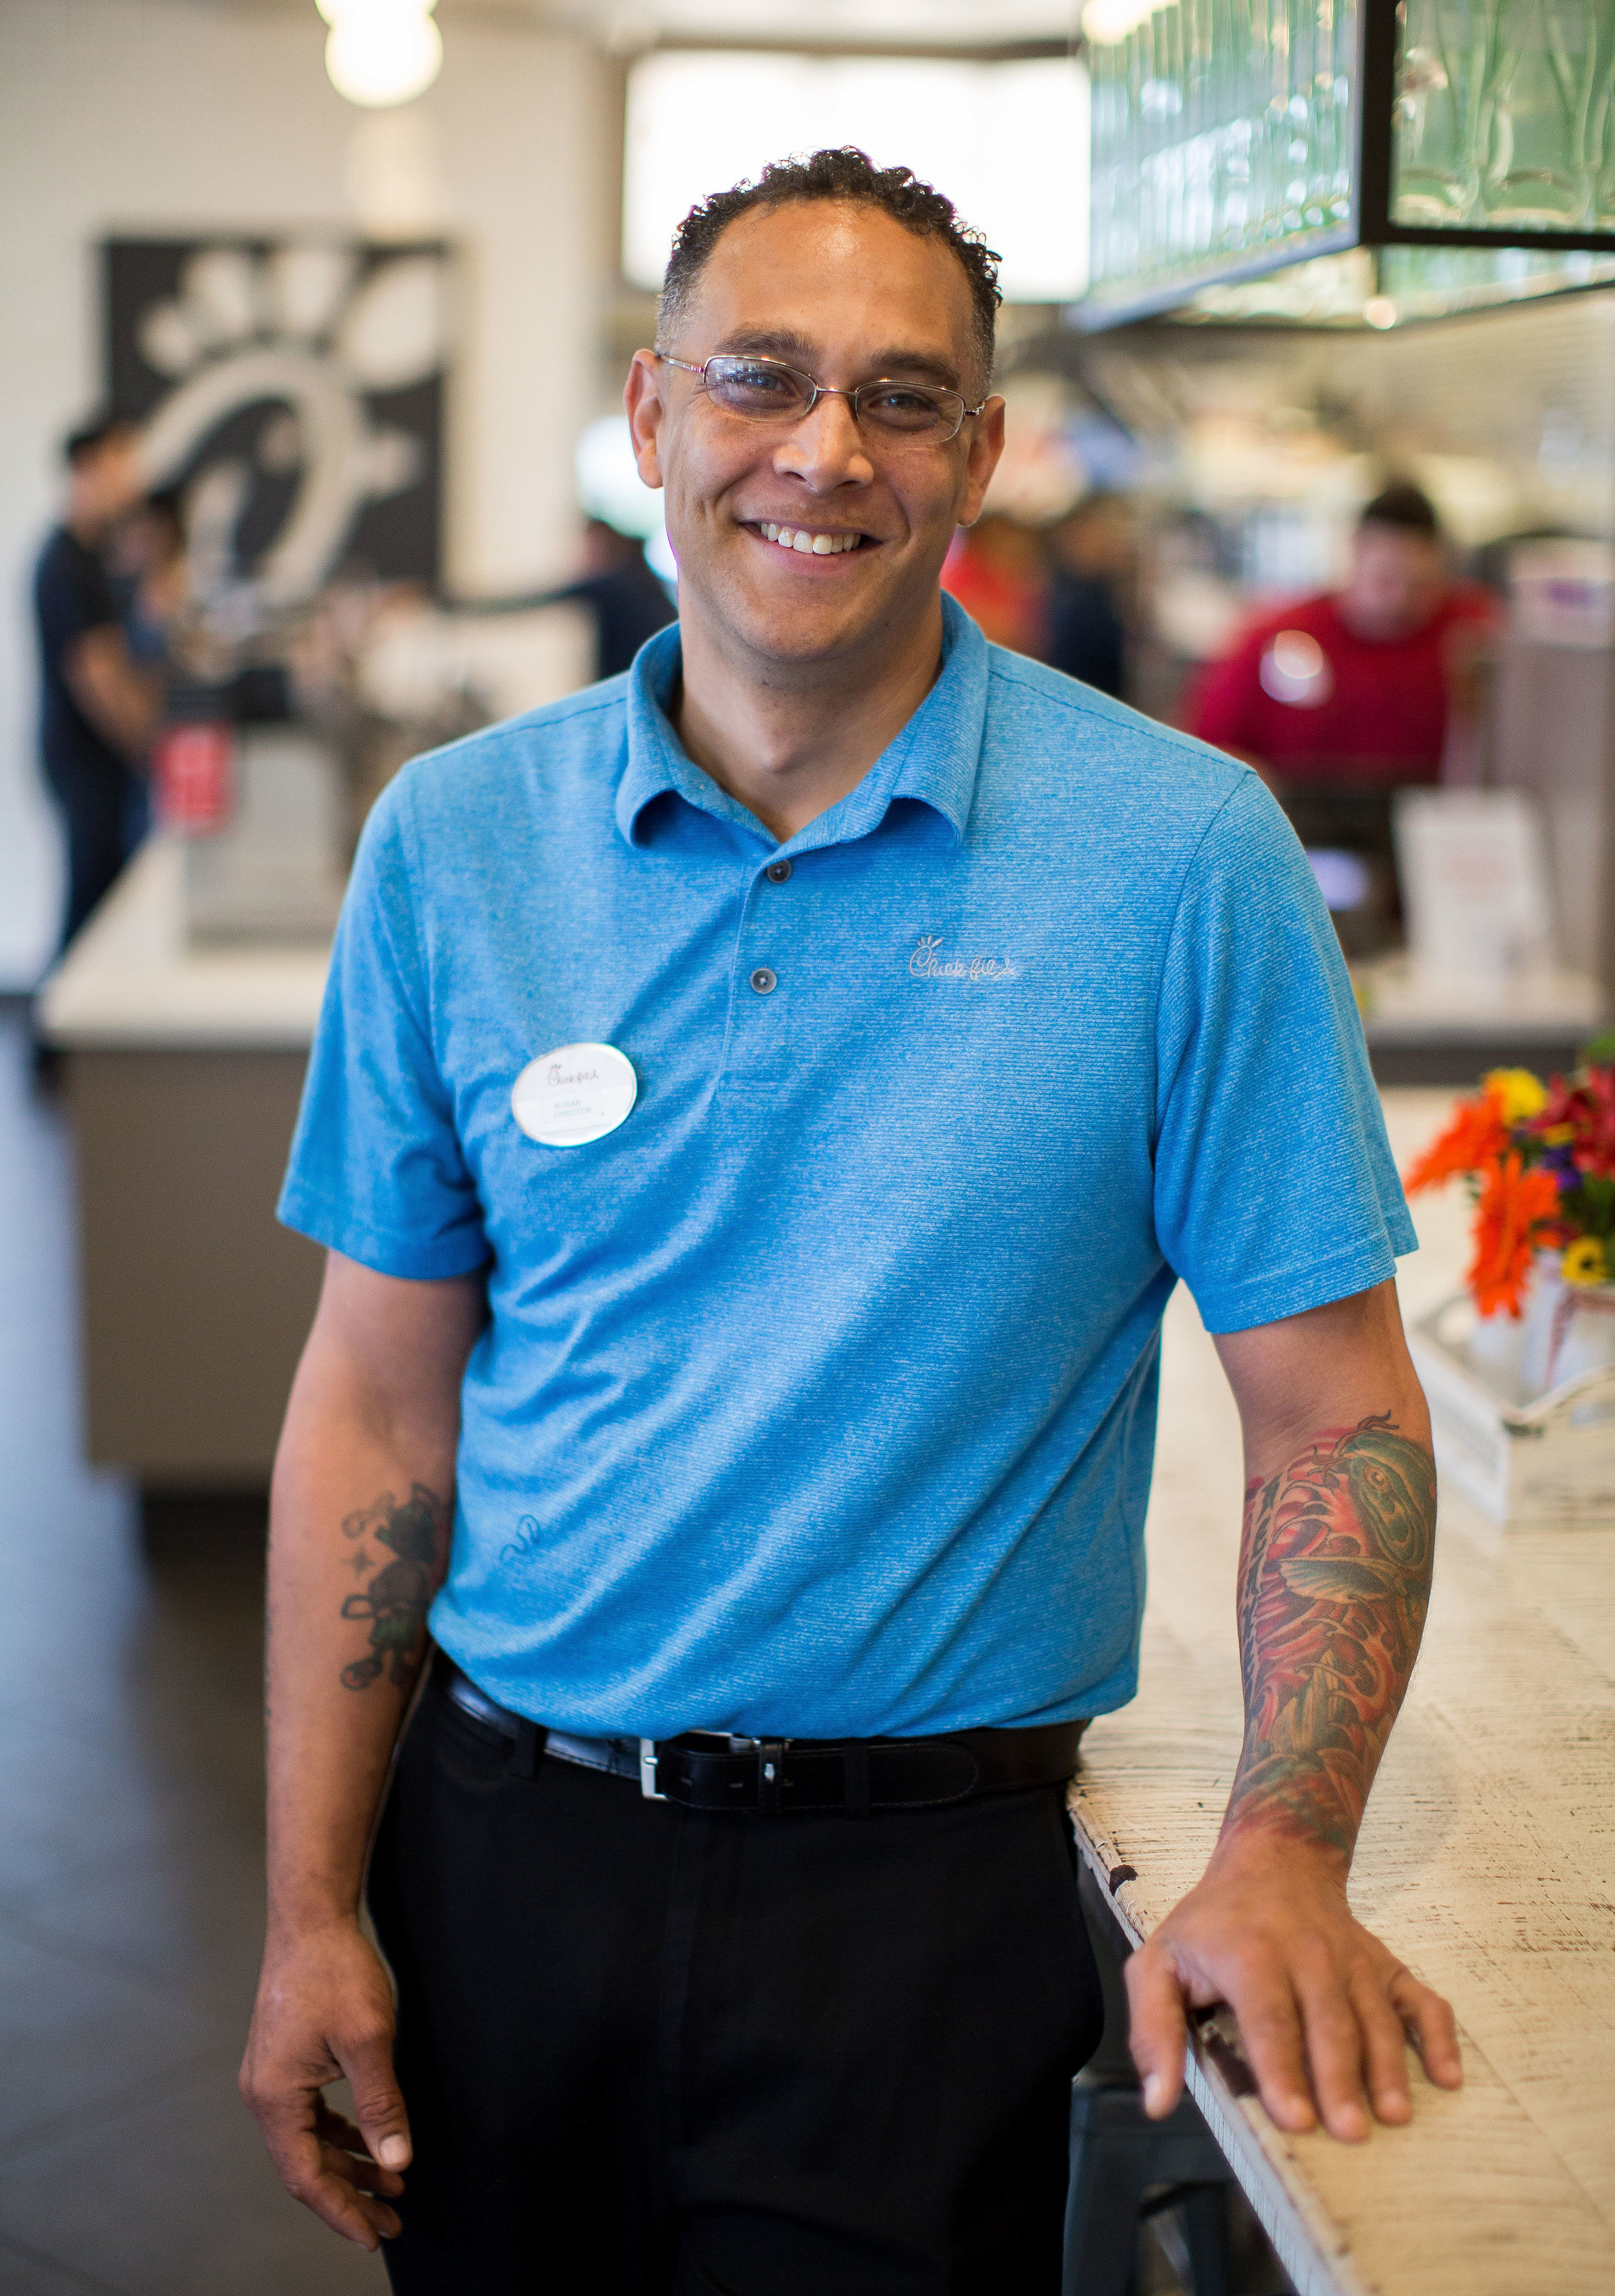 Male front of house team member smiling